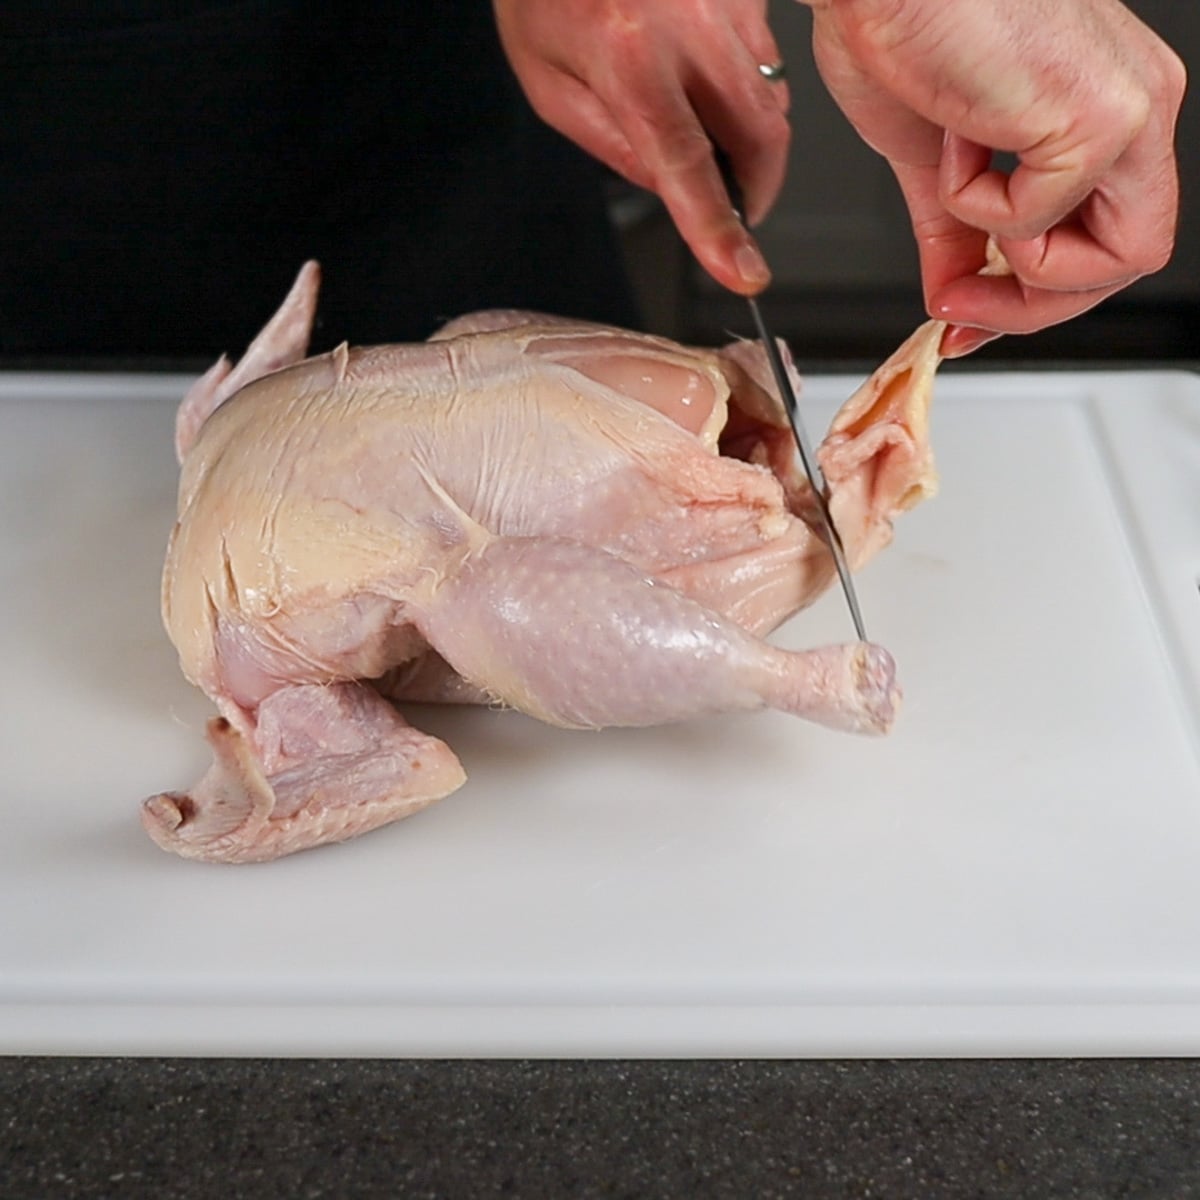 trimming excess fat off a whole chicken